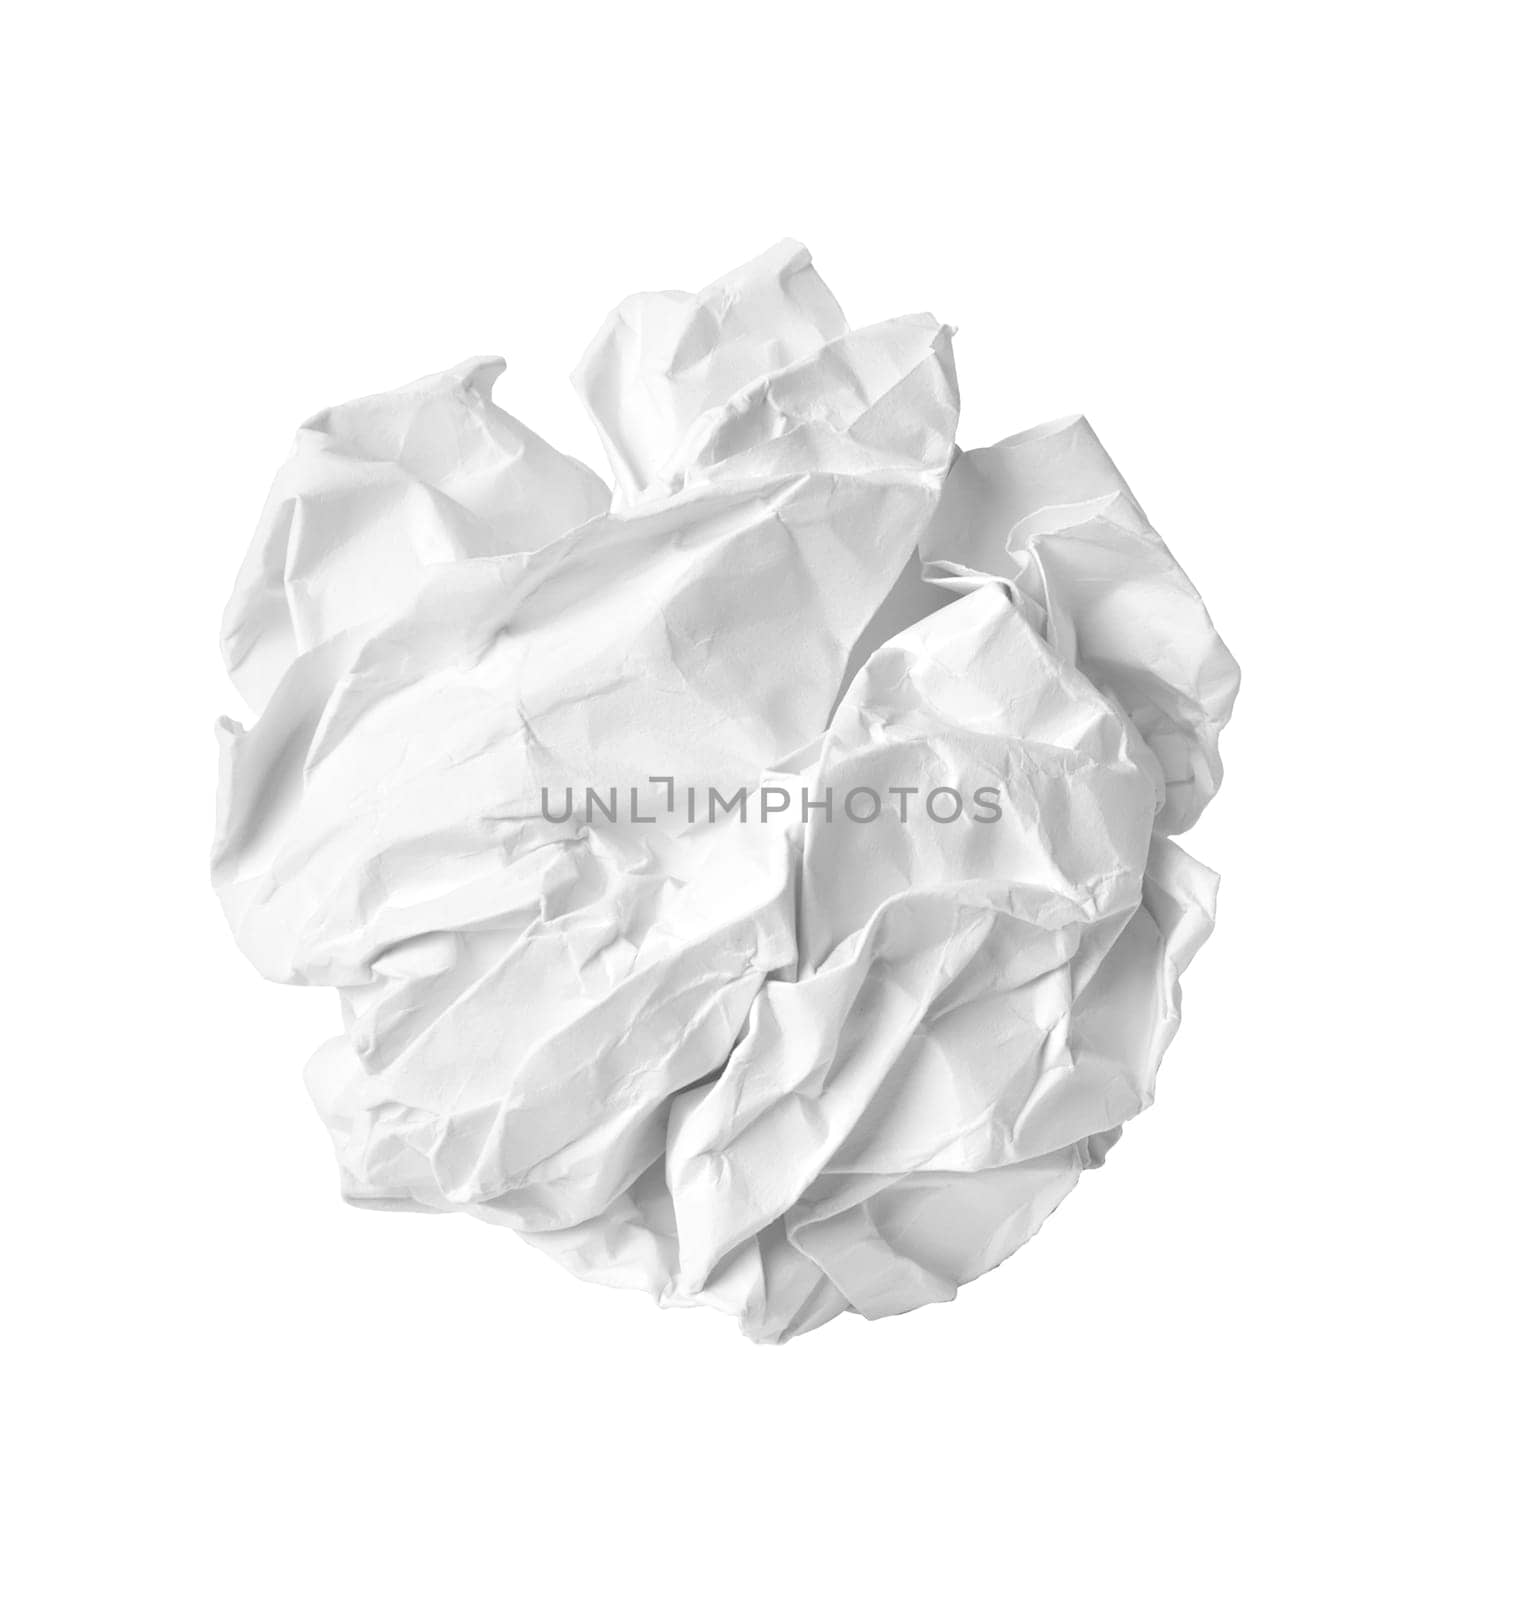 close up of a paper ball trash on white background